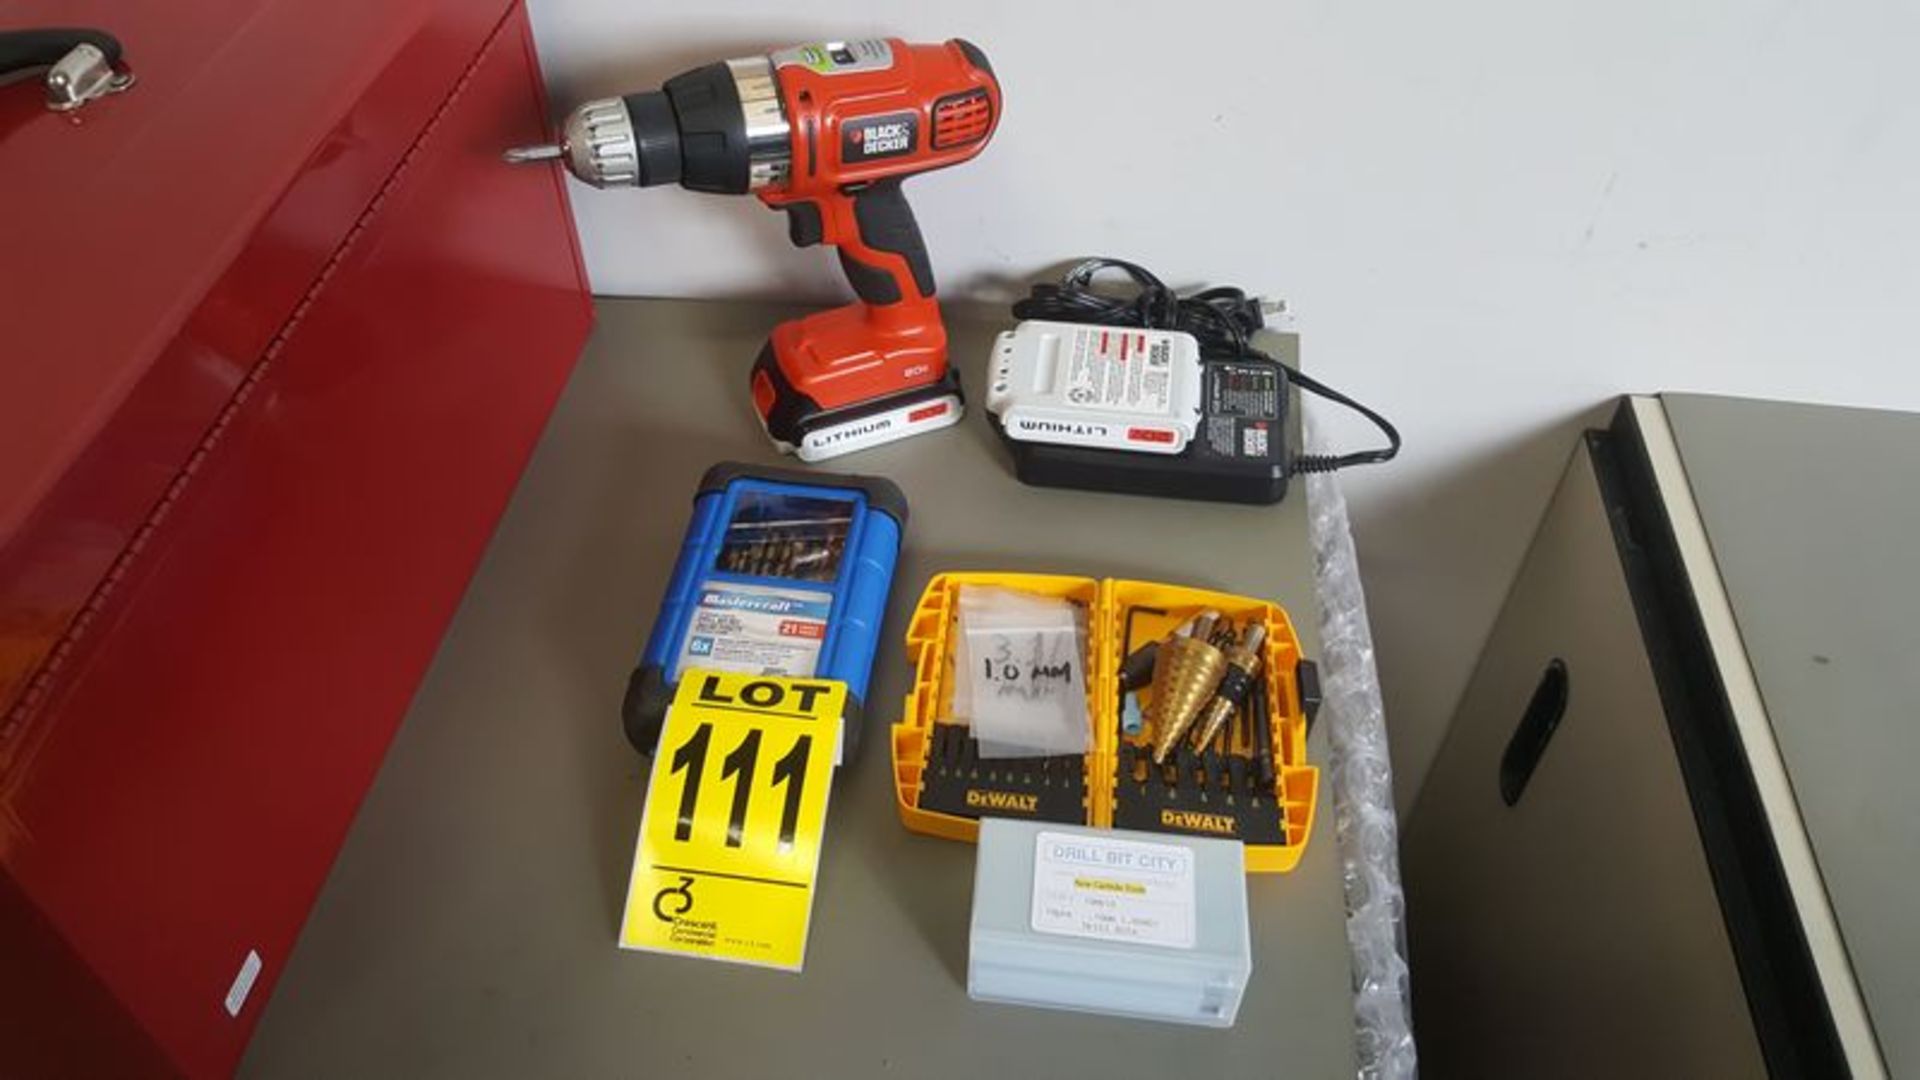 "Black and Decker" 20V cordless driver with 2 lithium batteries and charger and 3 incomplete drill